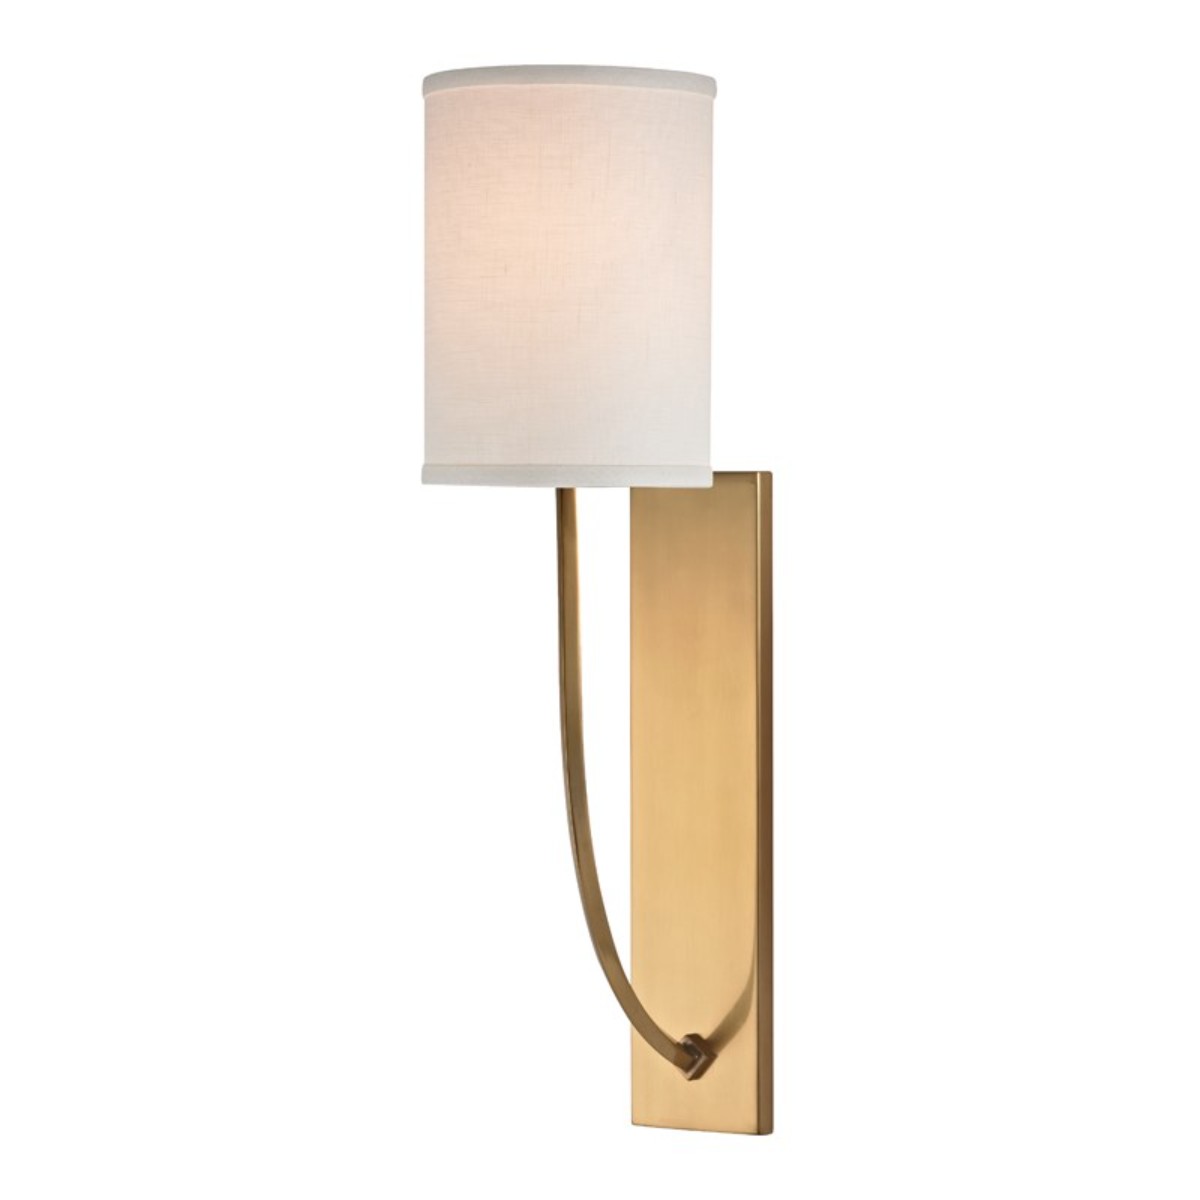 Hudson Valley Colton Wall Light Aged Brass